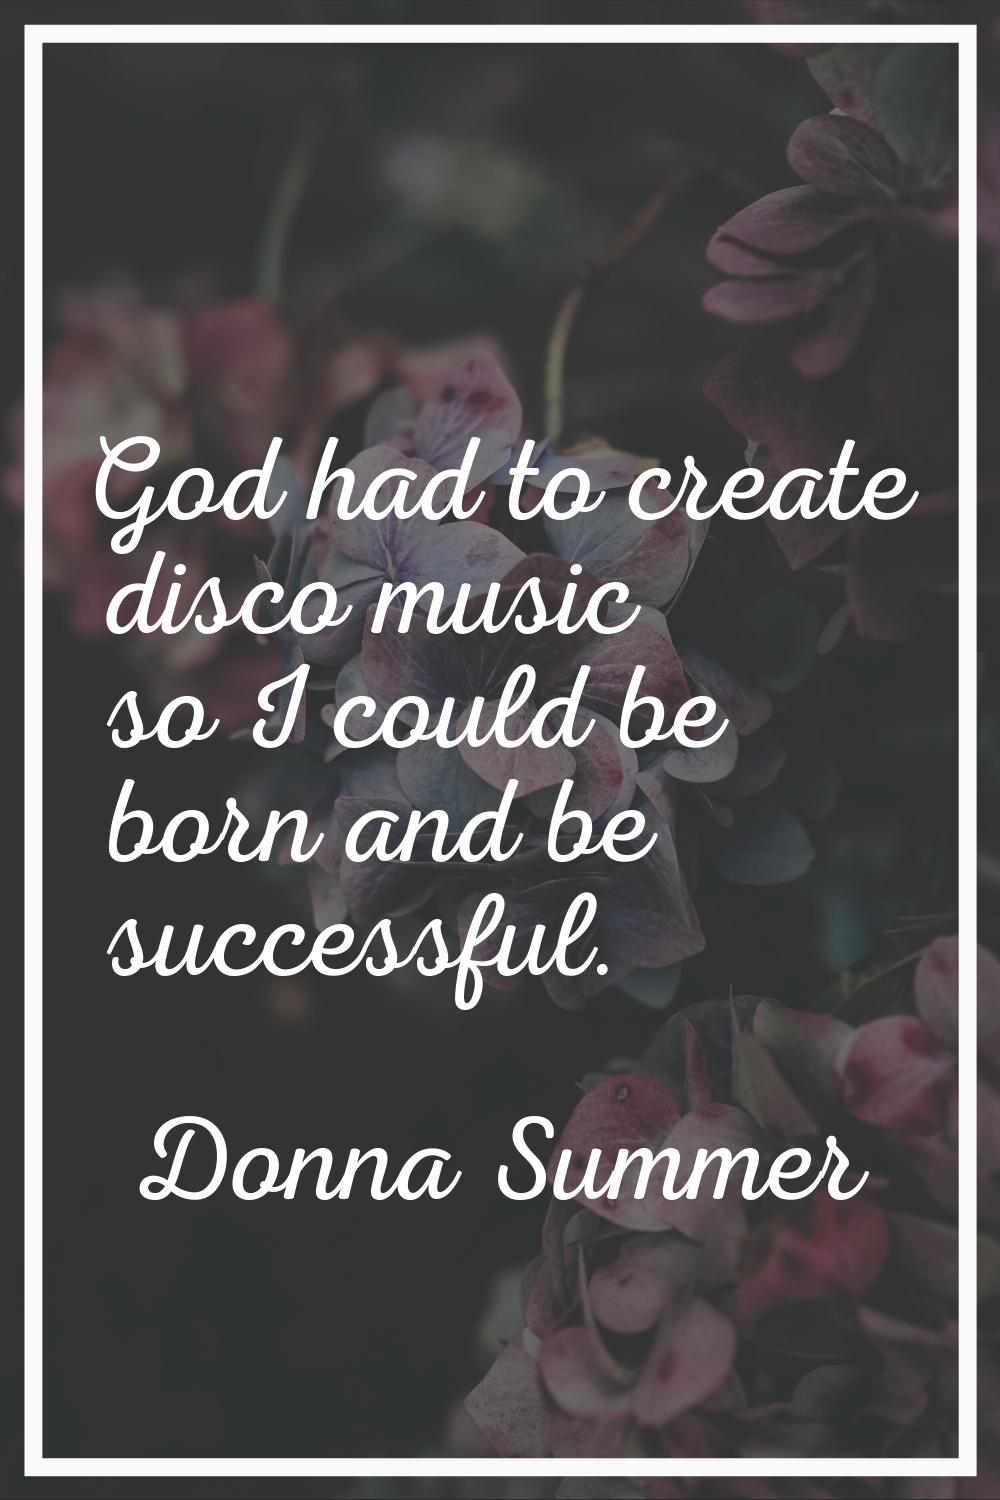 God had to create disco music so I could be born and be successful.